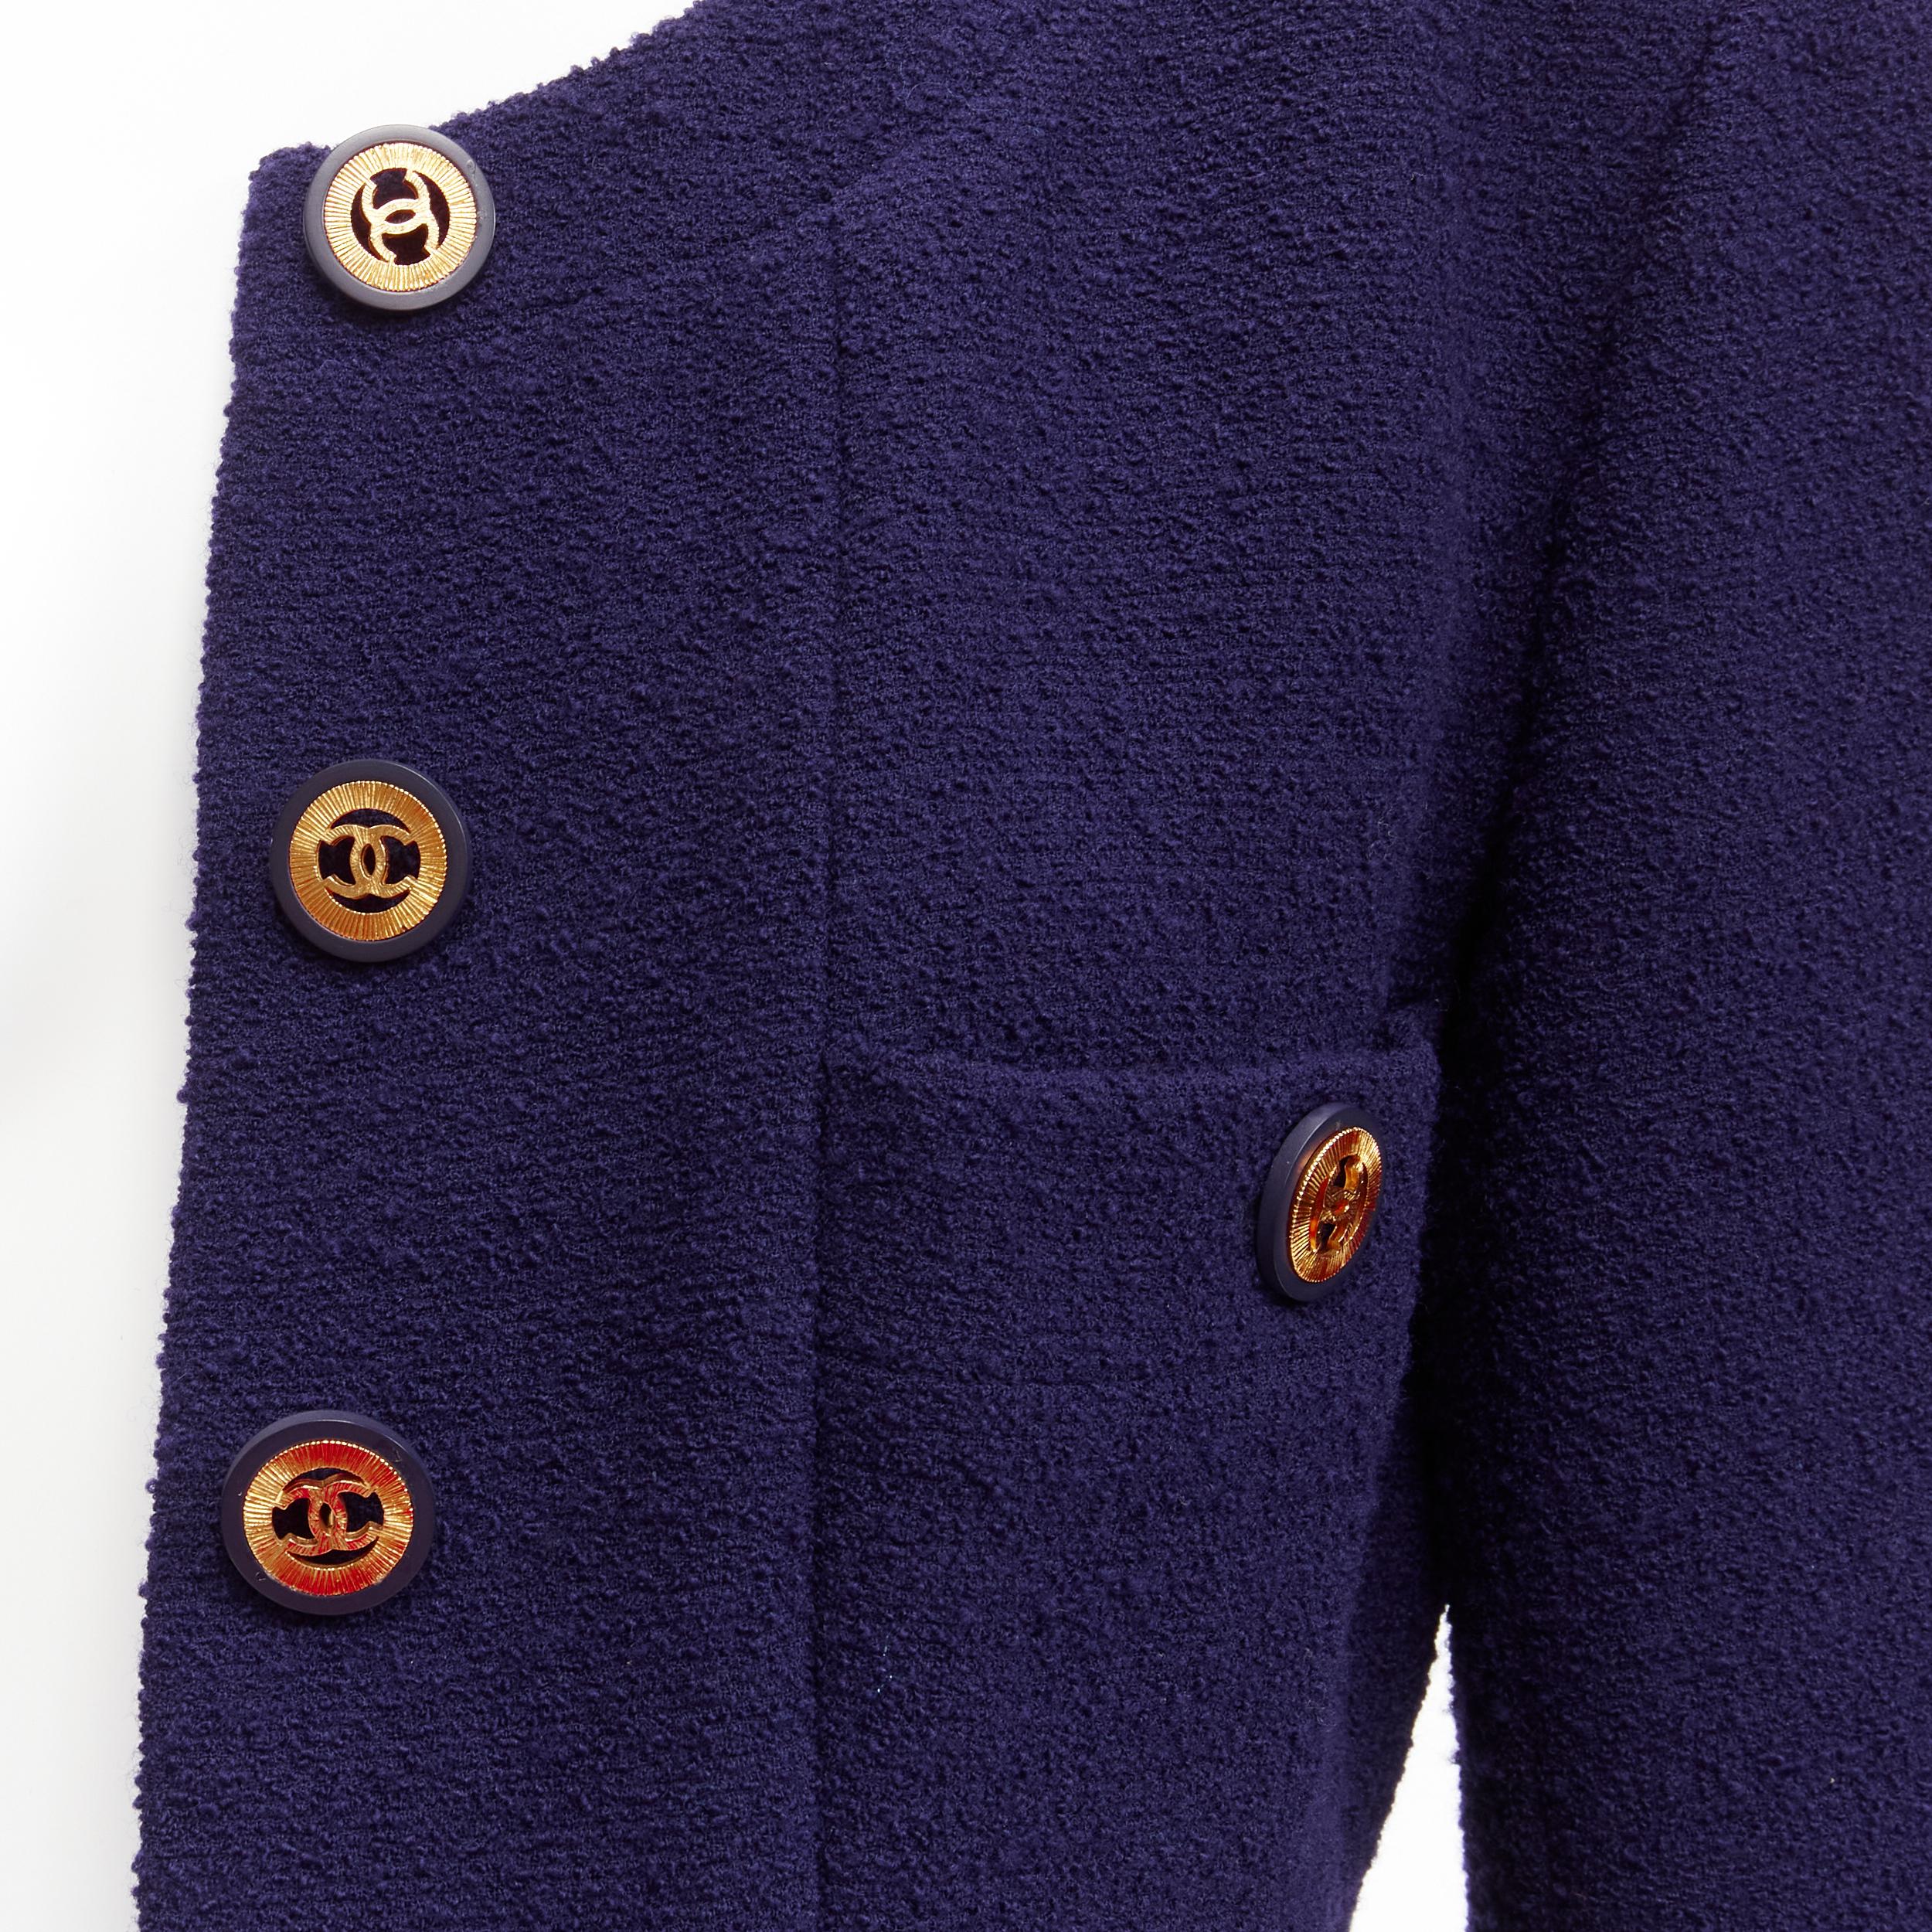 CHANEL Vintage navy blue tweed gold CC buttons 4 pocket jacket
Reference: LNKO/A02113
Brand: Chanel
Designer: Karl Lagerfeld
Material: Feels like wool
Color: Blue, Gold
Pattern: Solid
Closure: Button
Lining: Blue Silk

CONDITION:
Condition: